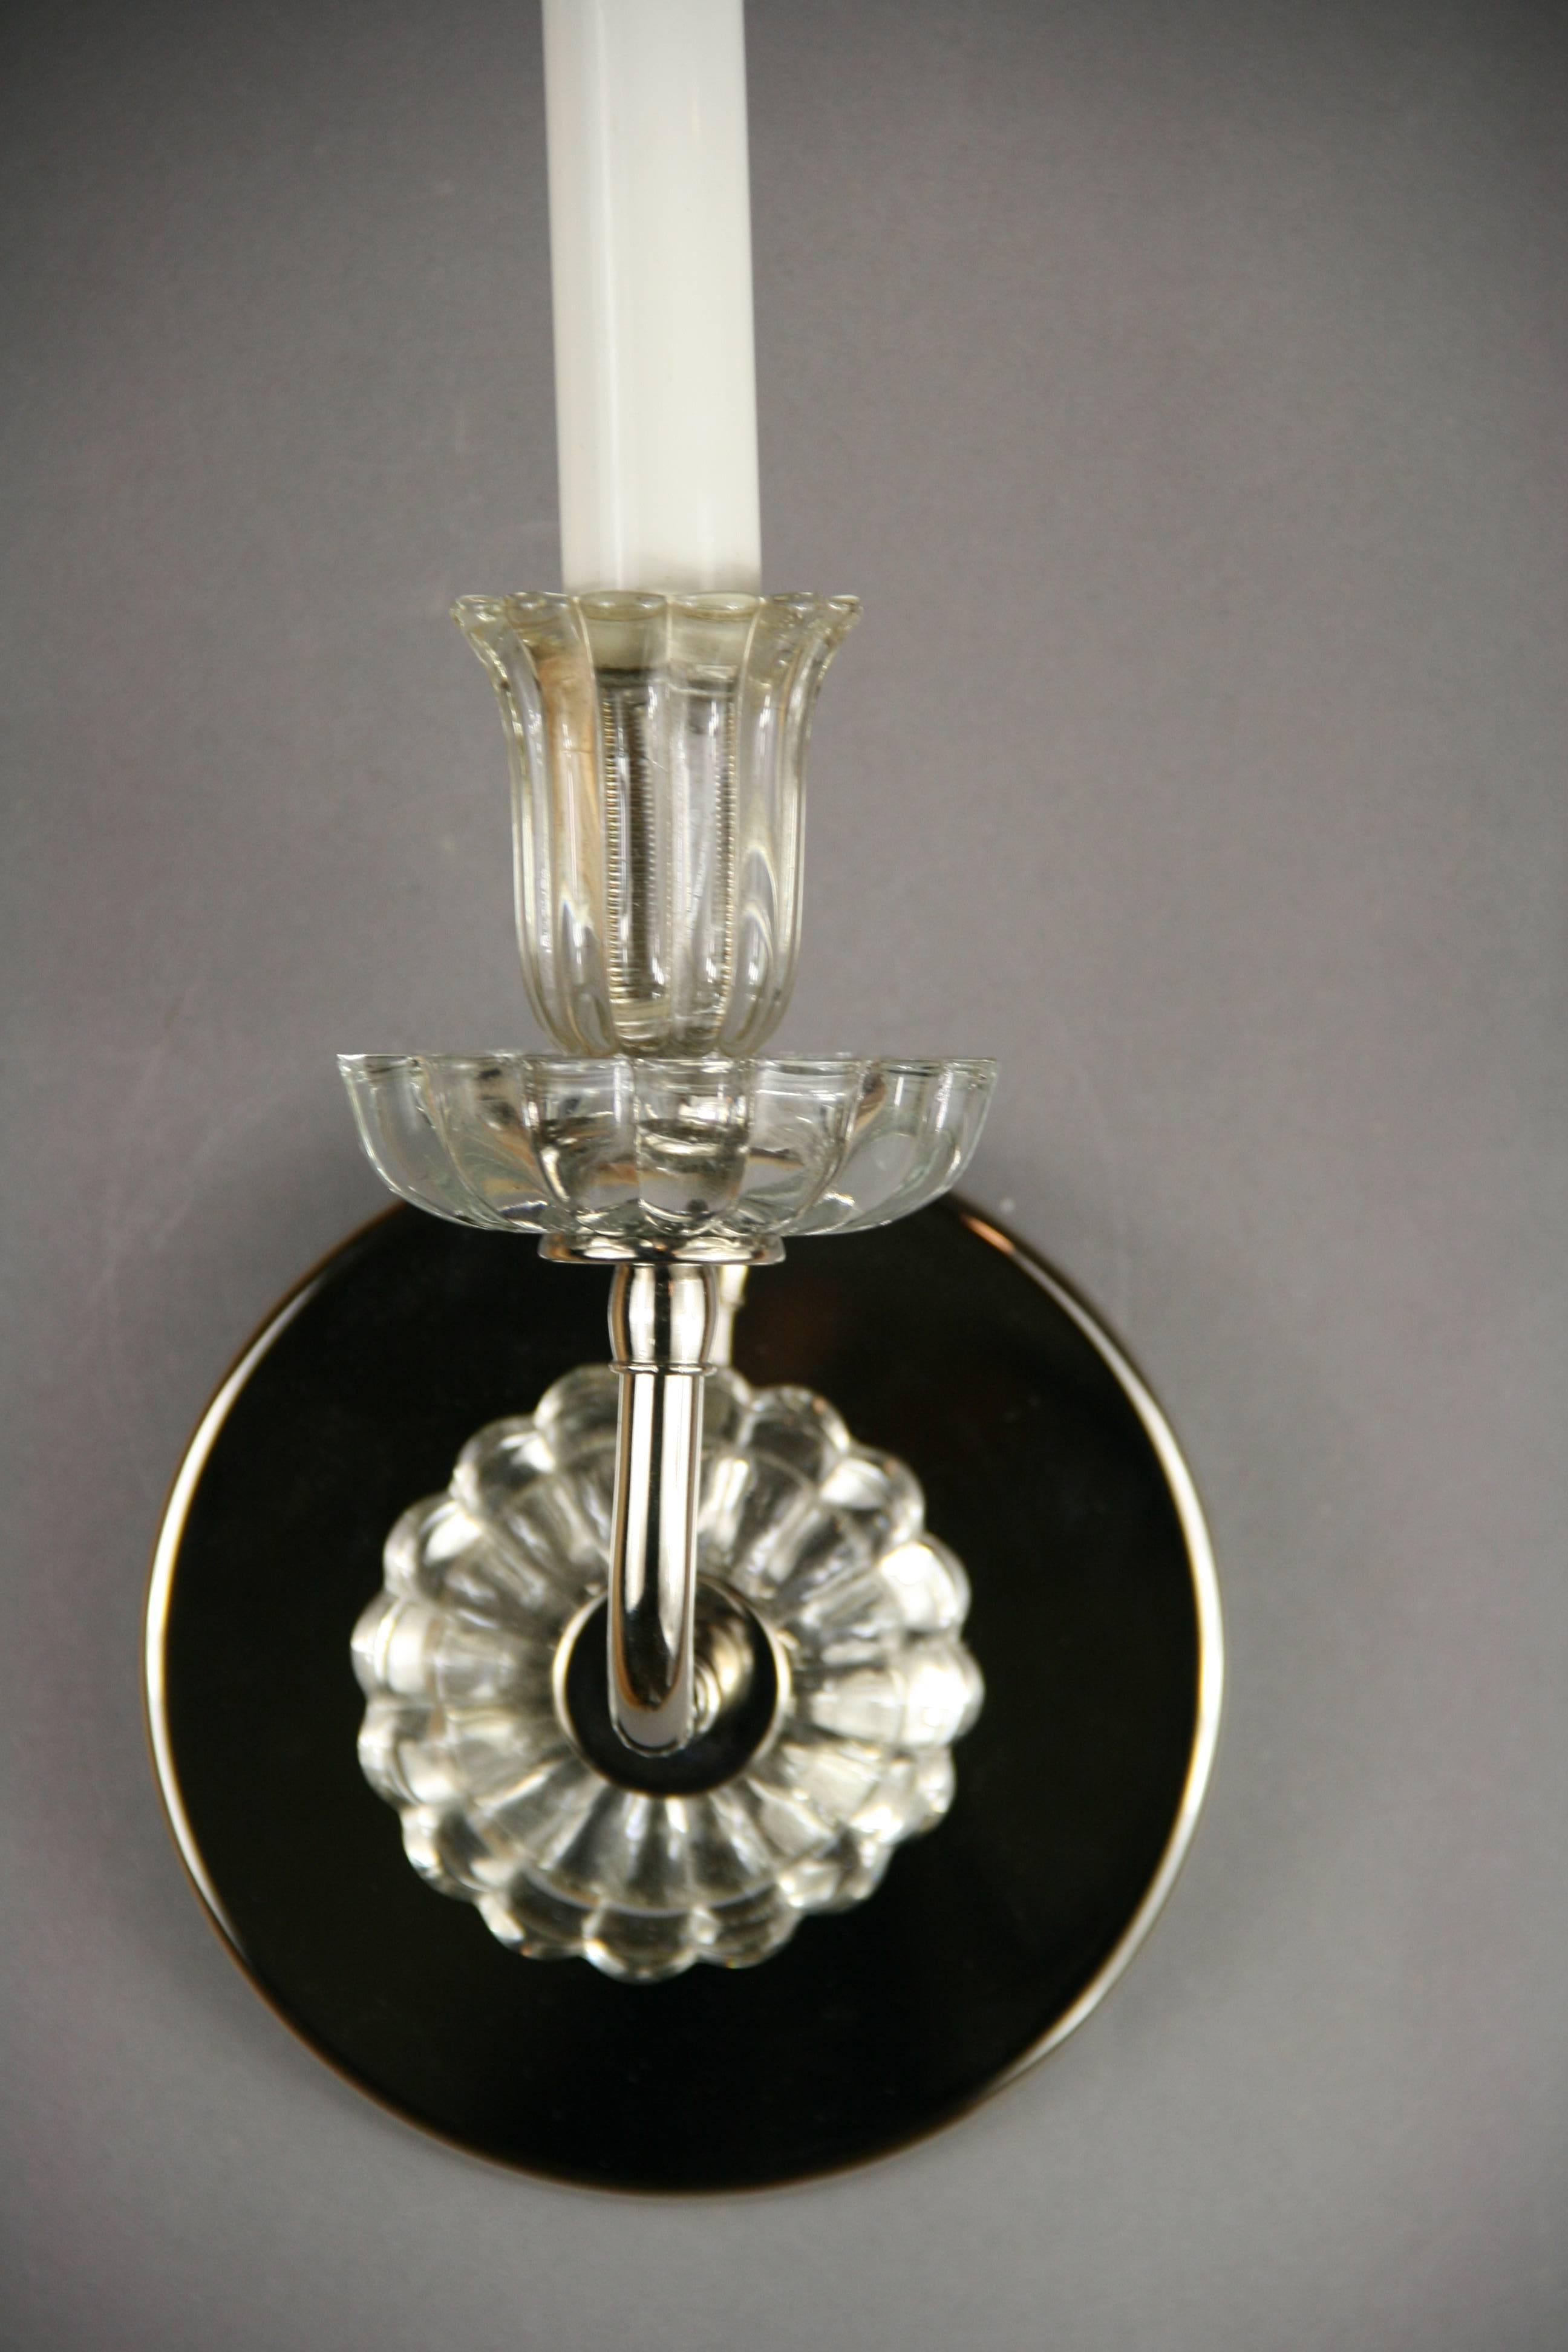 2-1828ab Pair of tulip glass sconces. Takes 60 watt candelabra bulb
Two pair available
Priced per pair.